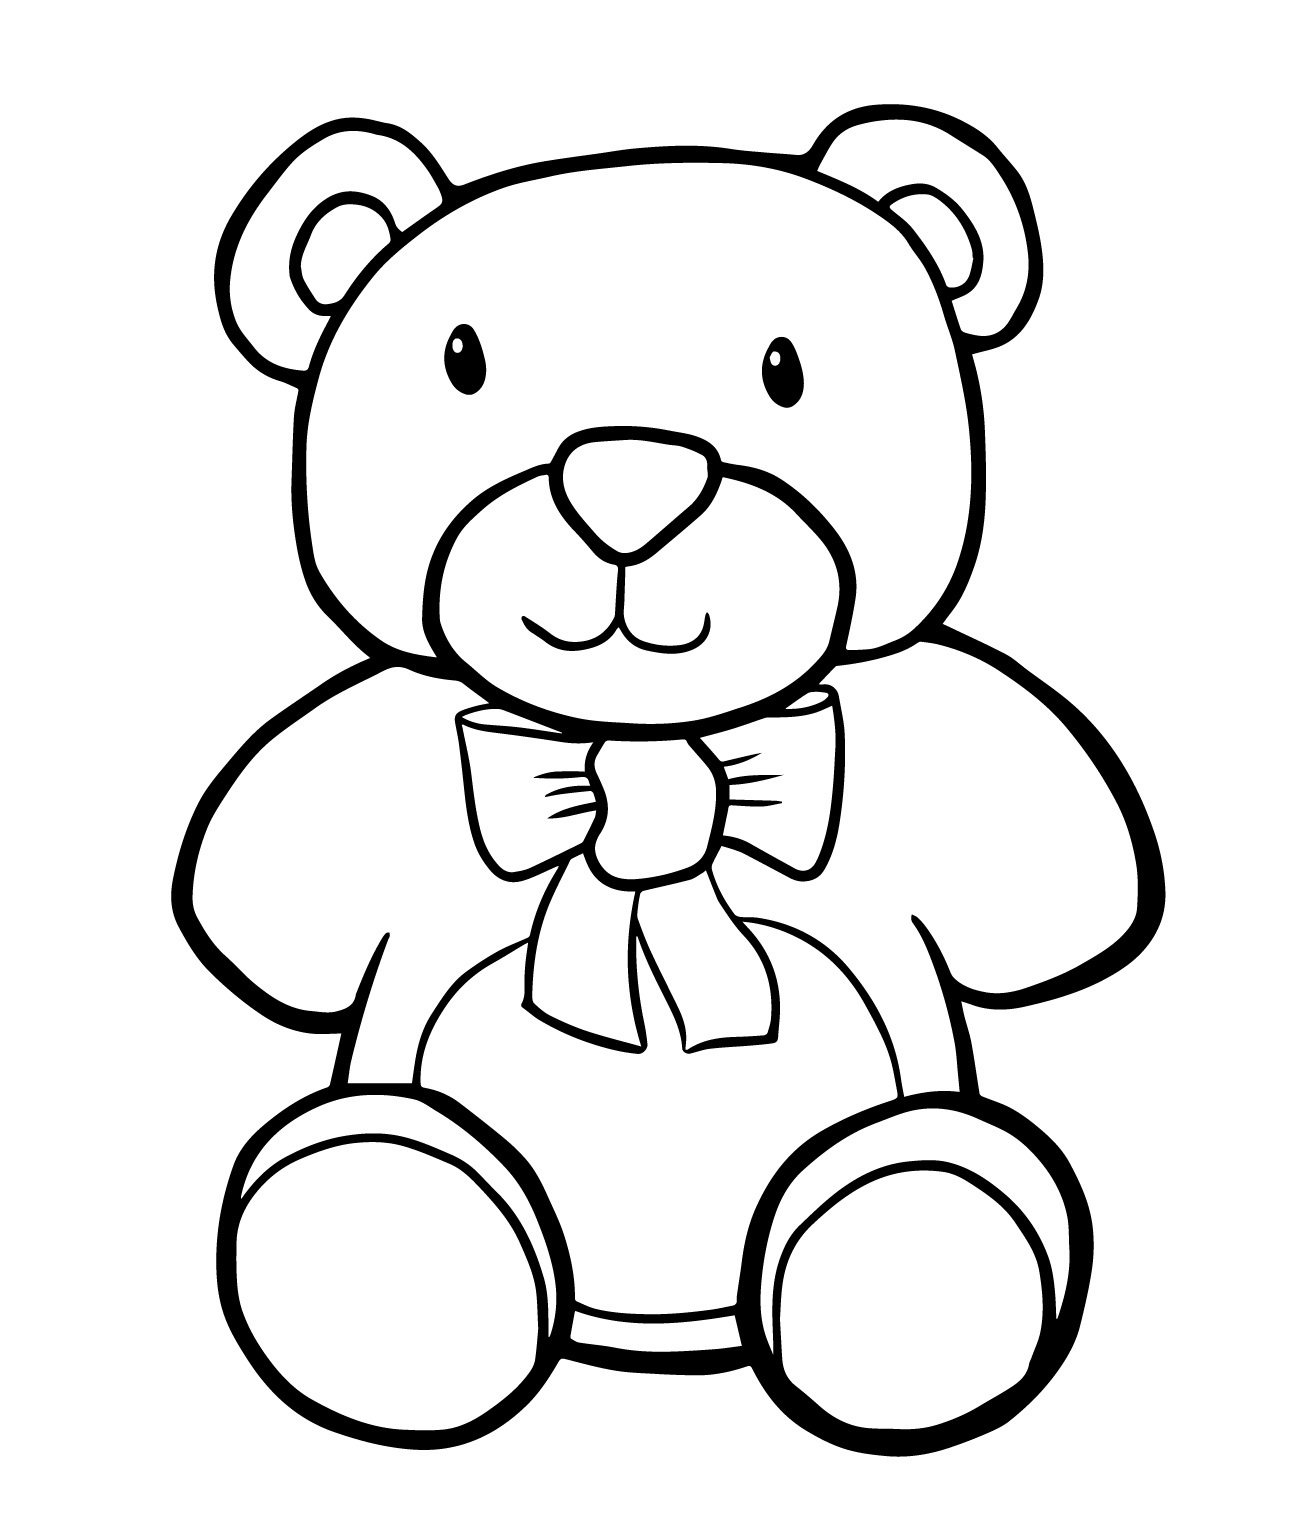 cambodia coloring activity pages for kids - photo #40